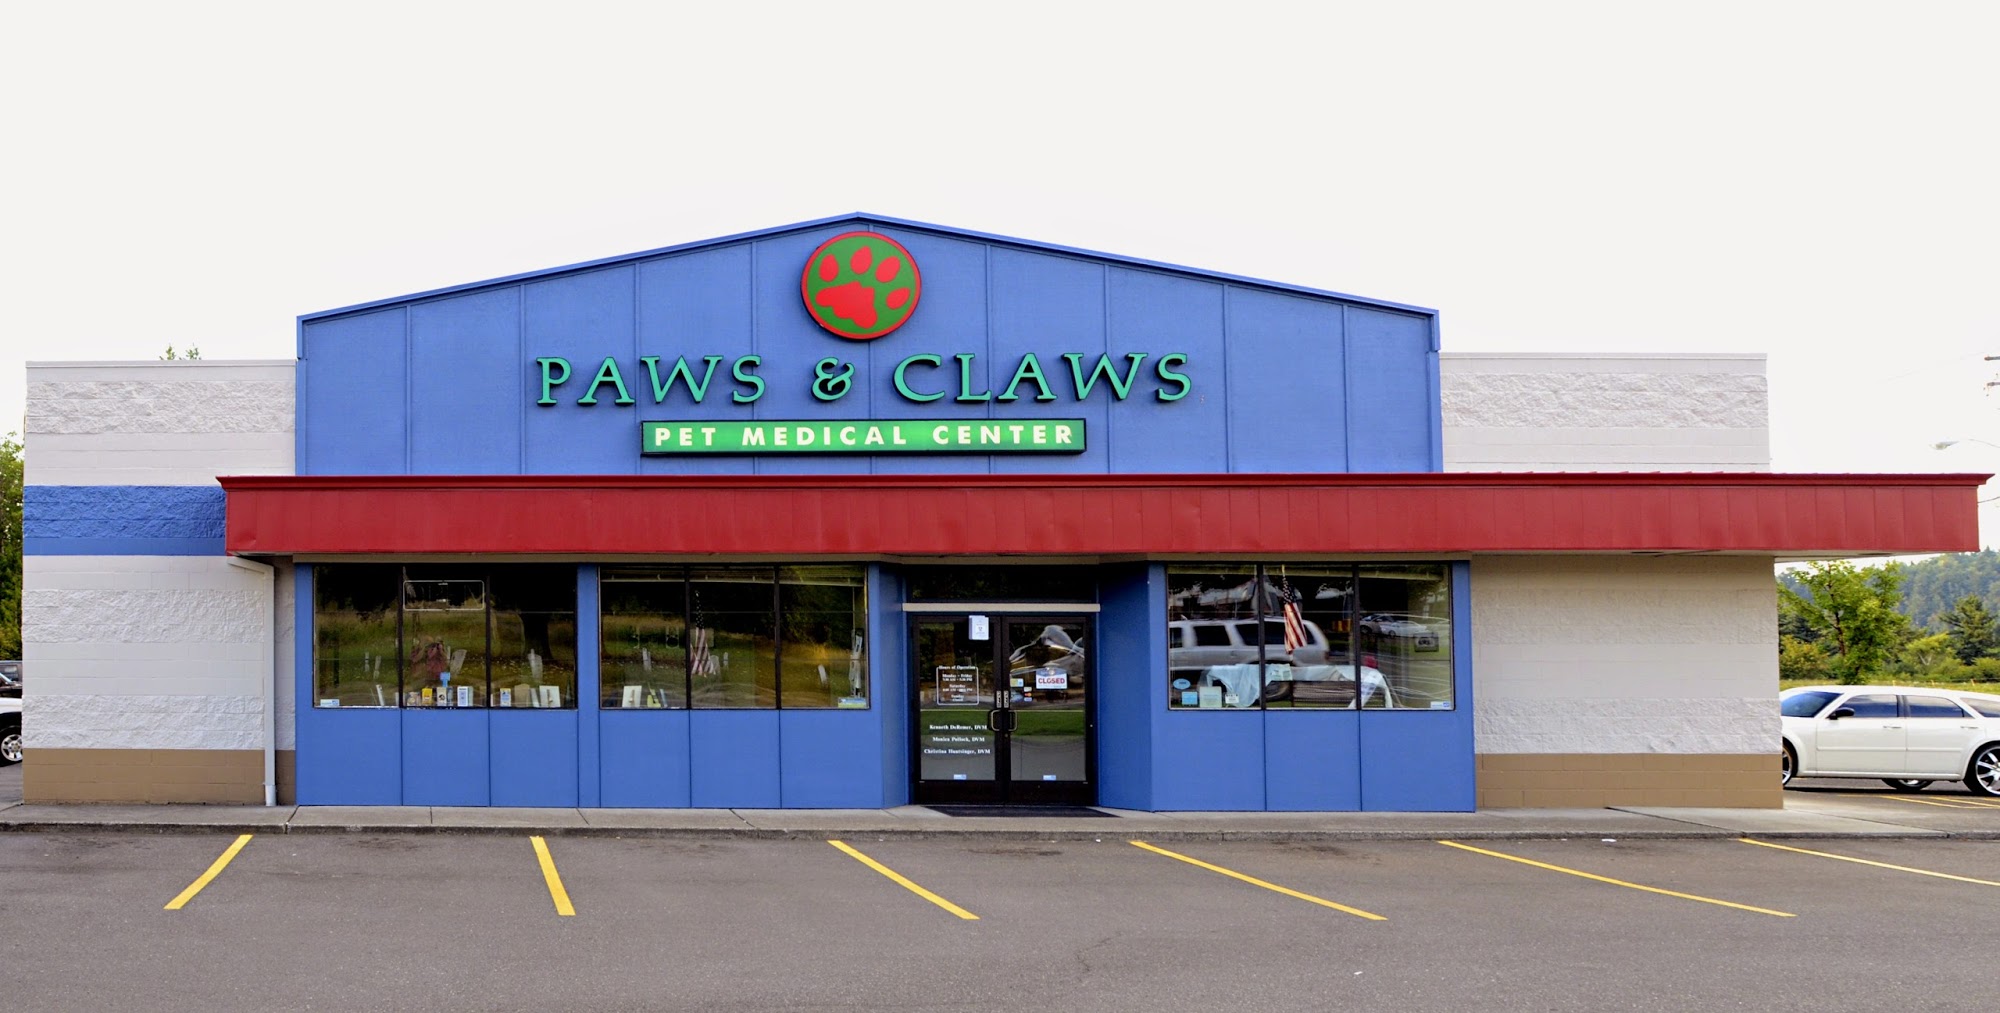 Paws & Claws Pet Medical Center